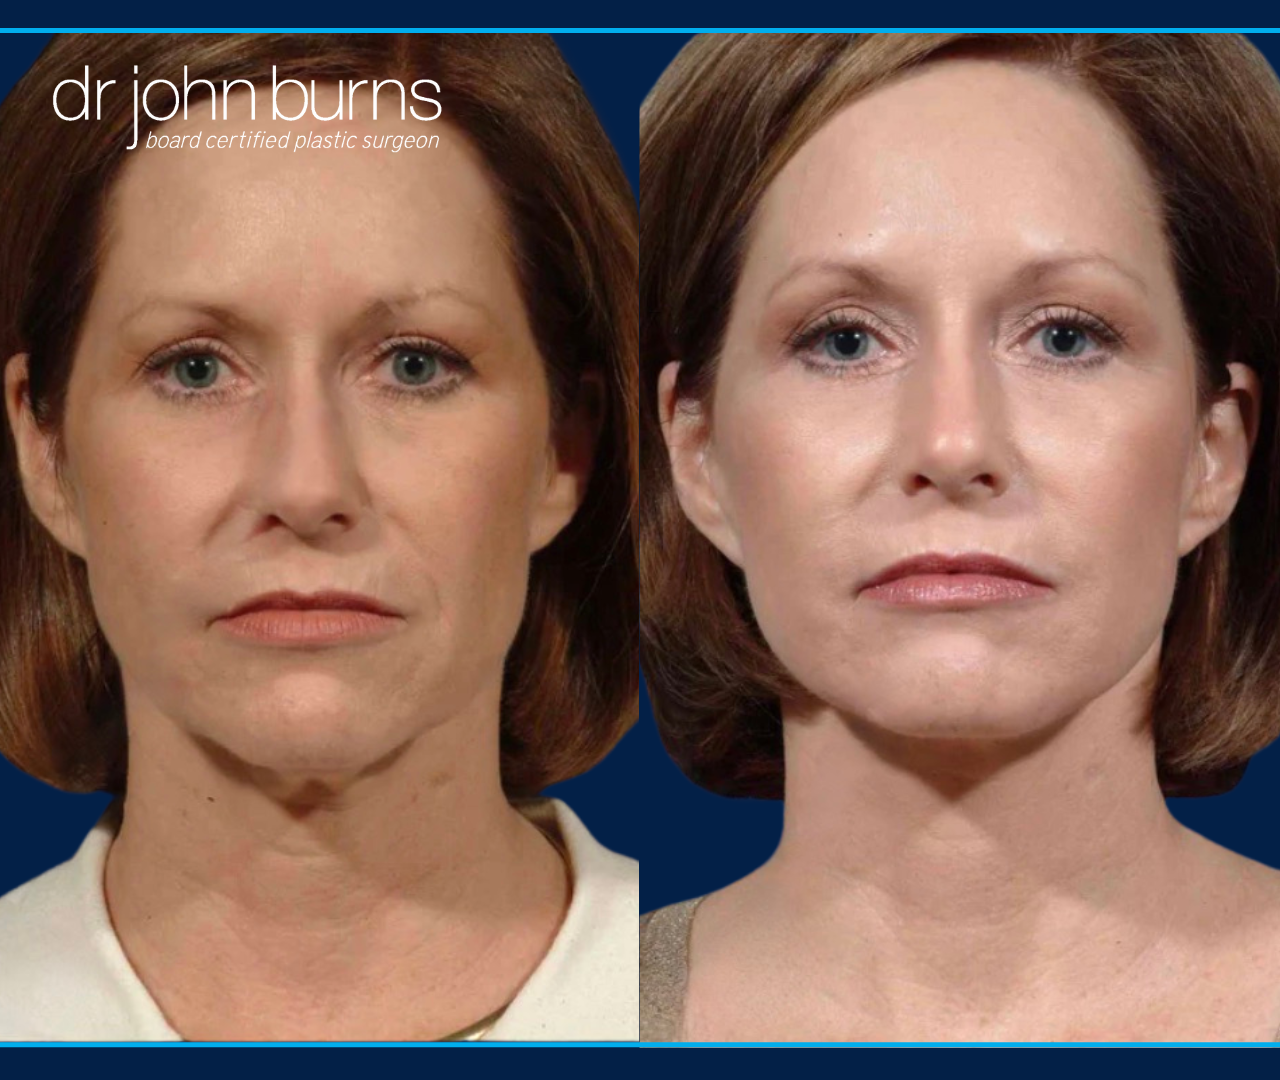 Before and After Dallas Mini Facelift and Rhinoplasty by Dr. John Burns